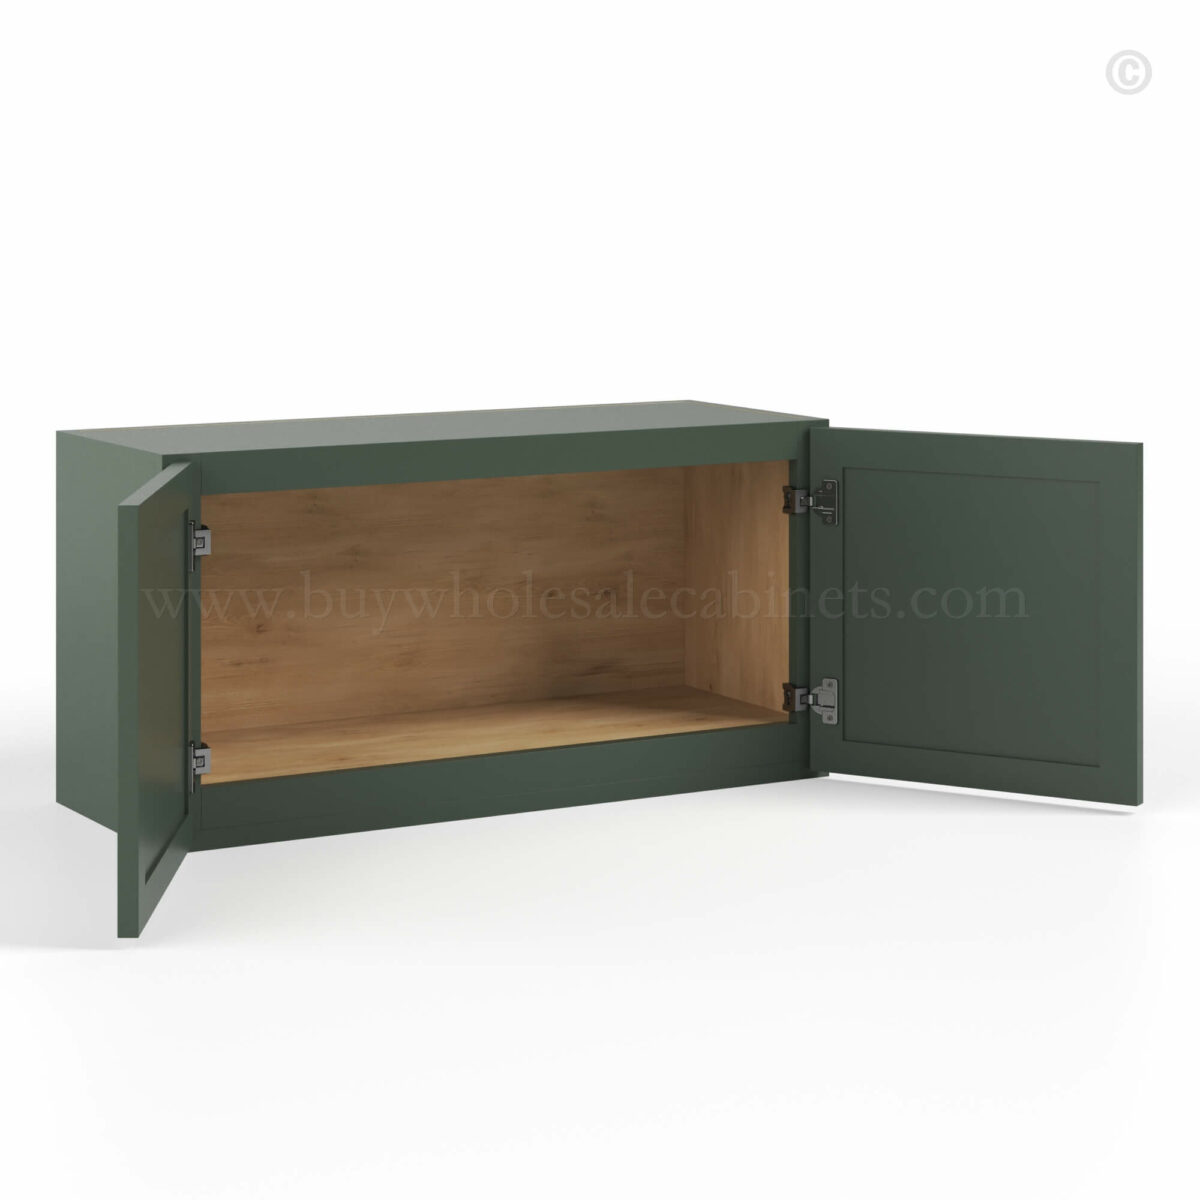 Slim Shaker Green Double Door Wall Cabinets 15″H, rta cabinets, wholesale cabinets